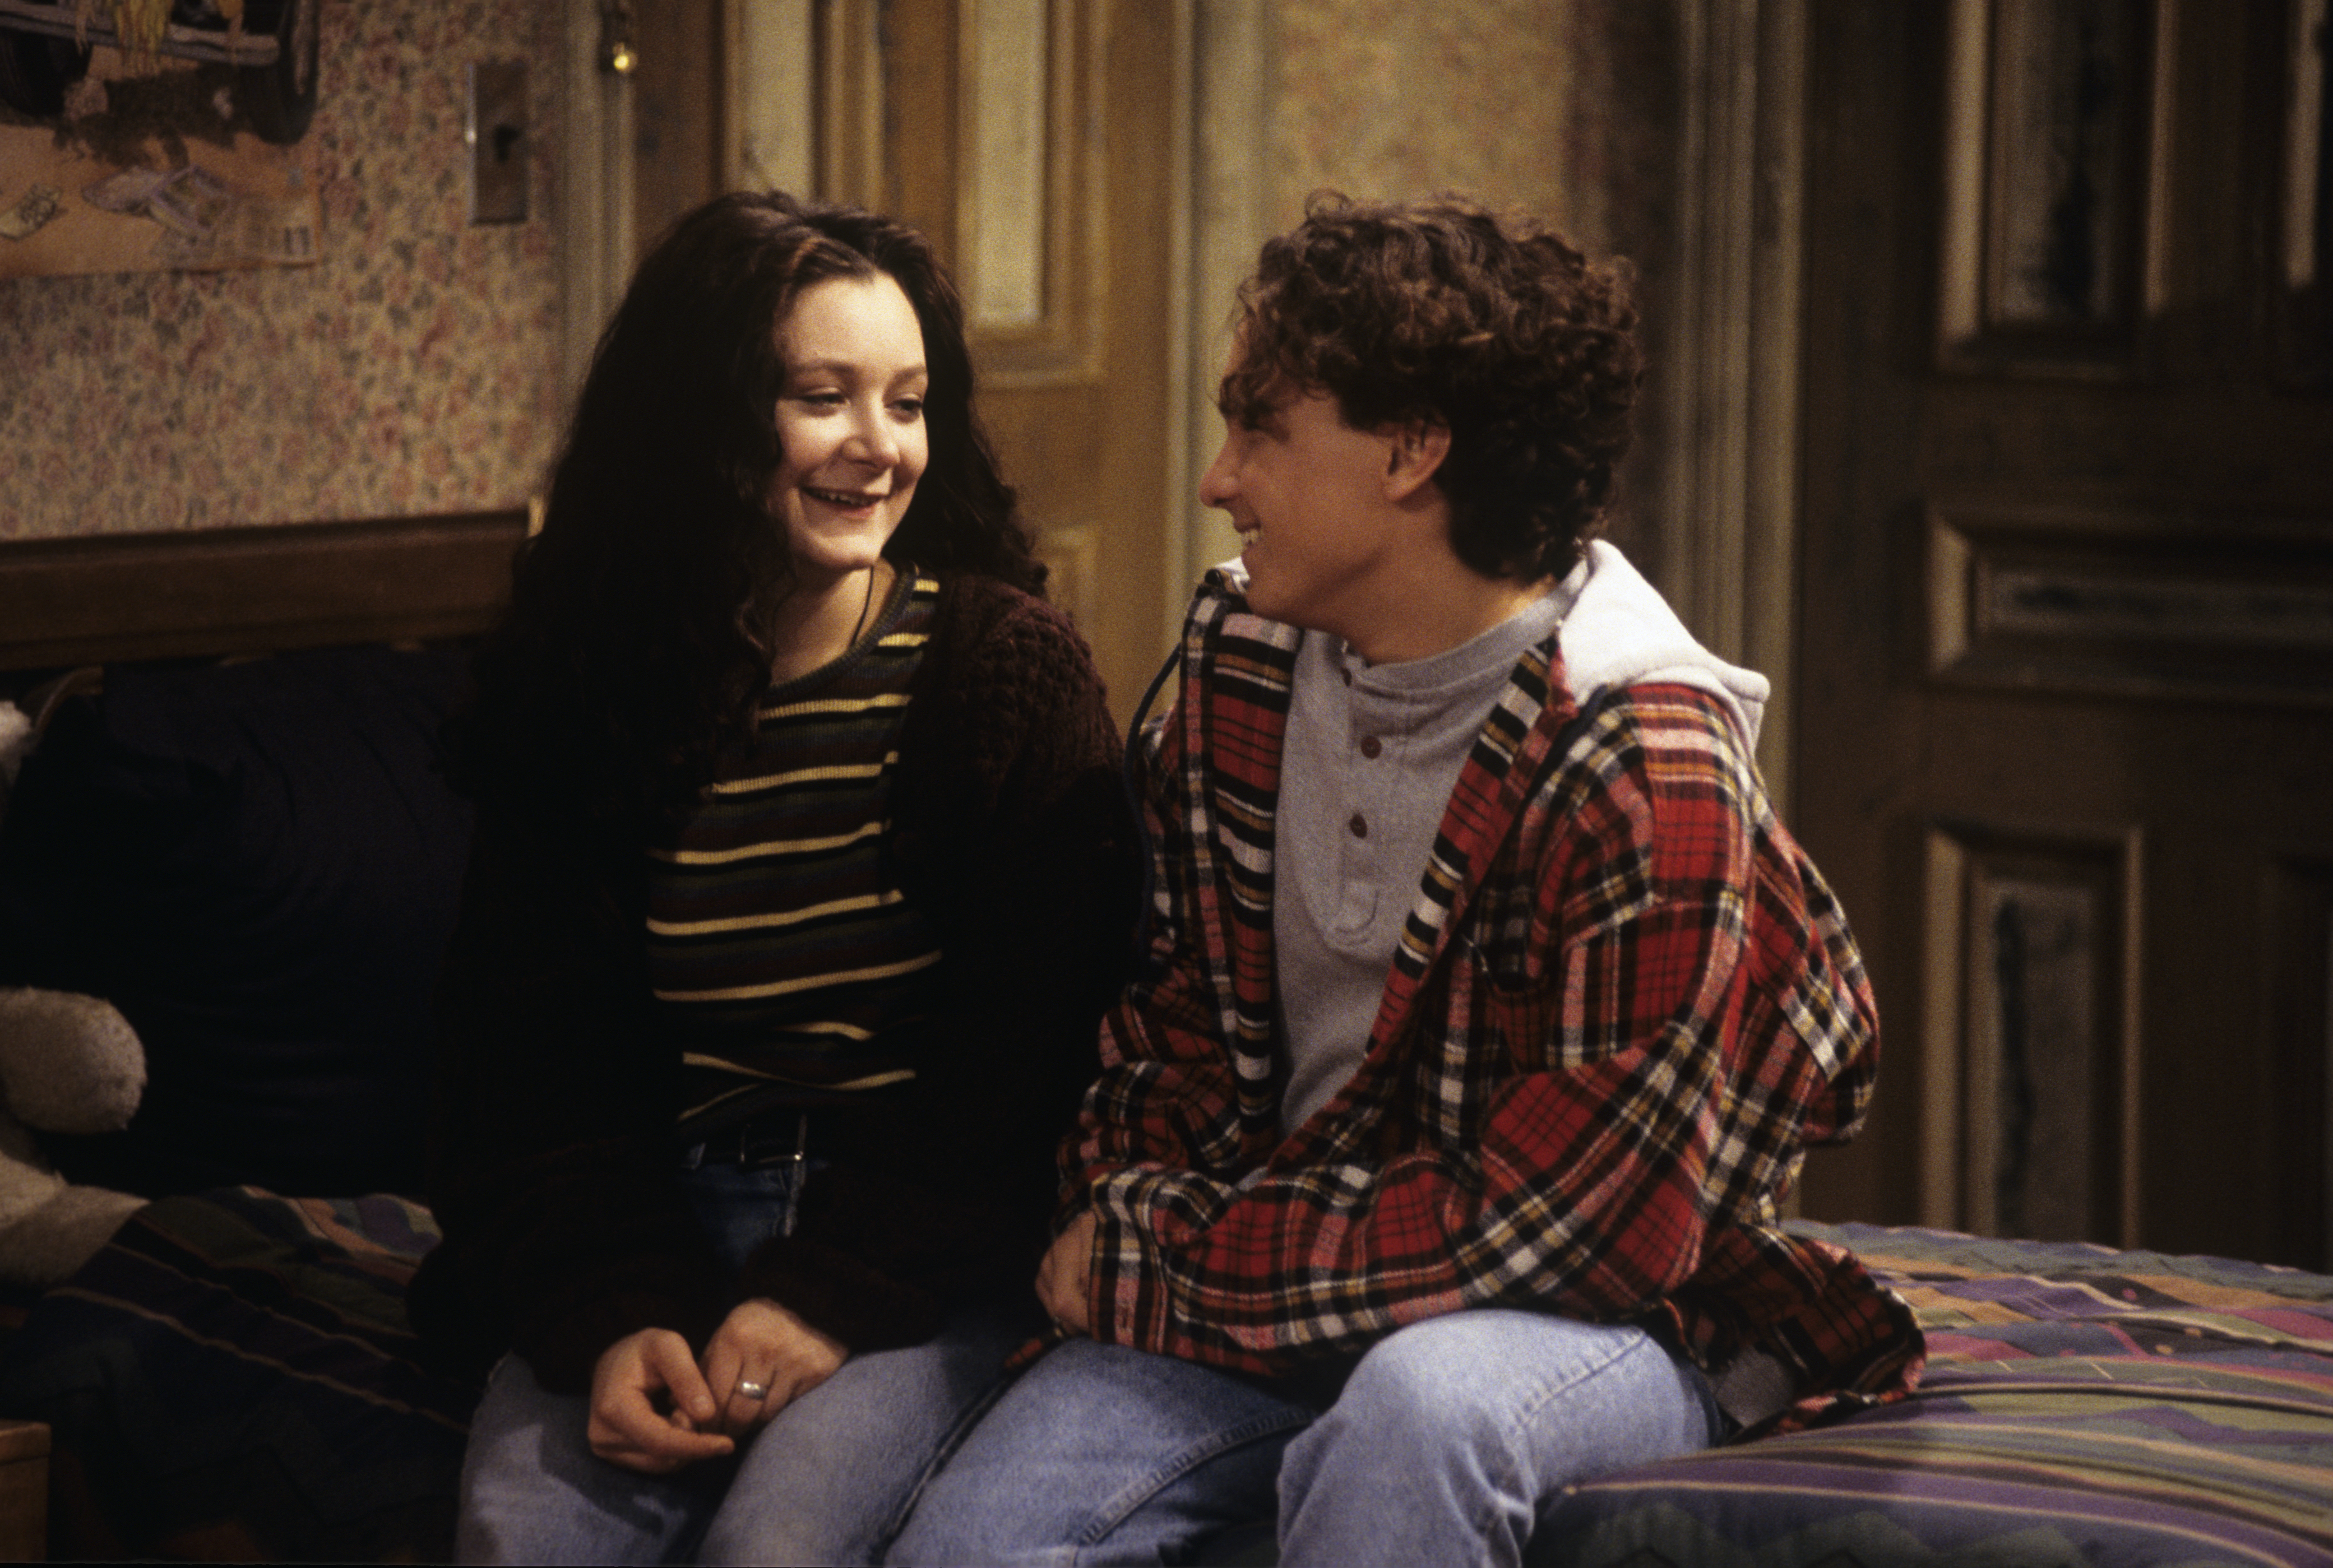 The stars on an episode of "Roseanne," circa 1991 | Source: Getty Images